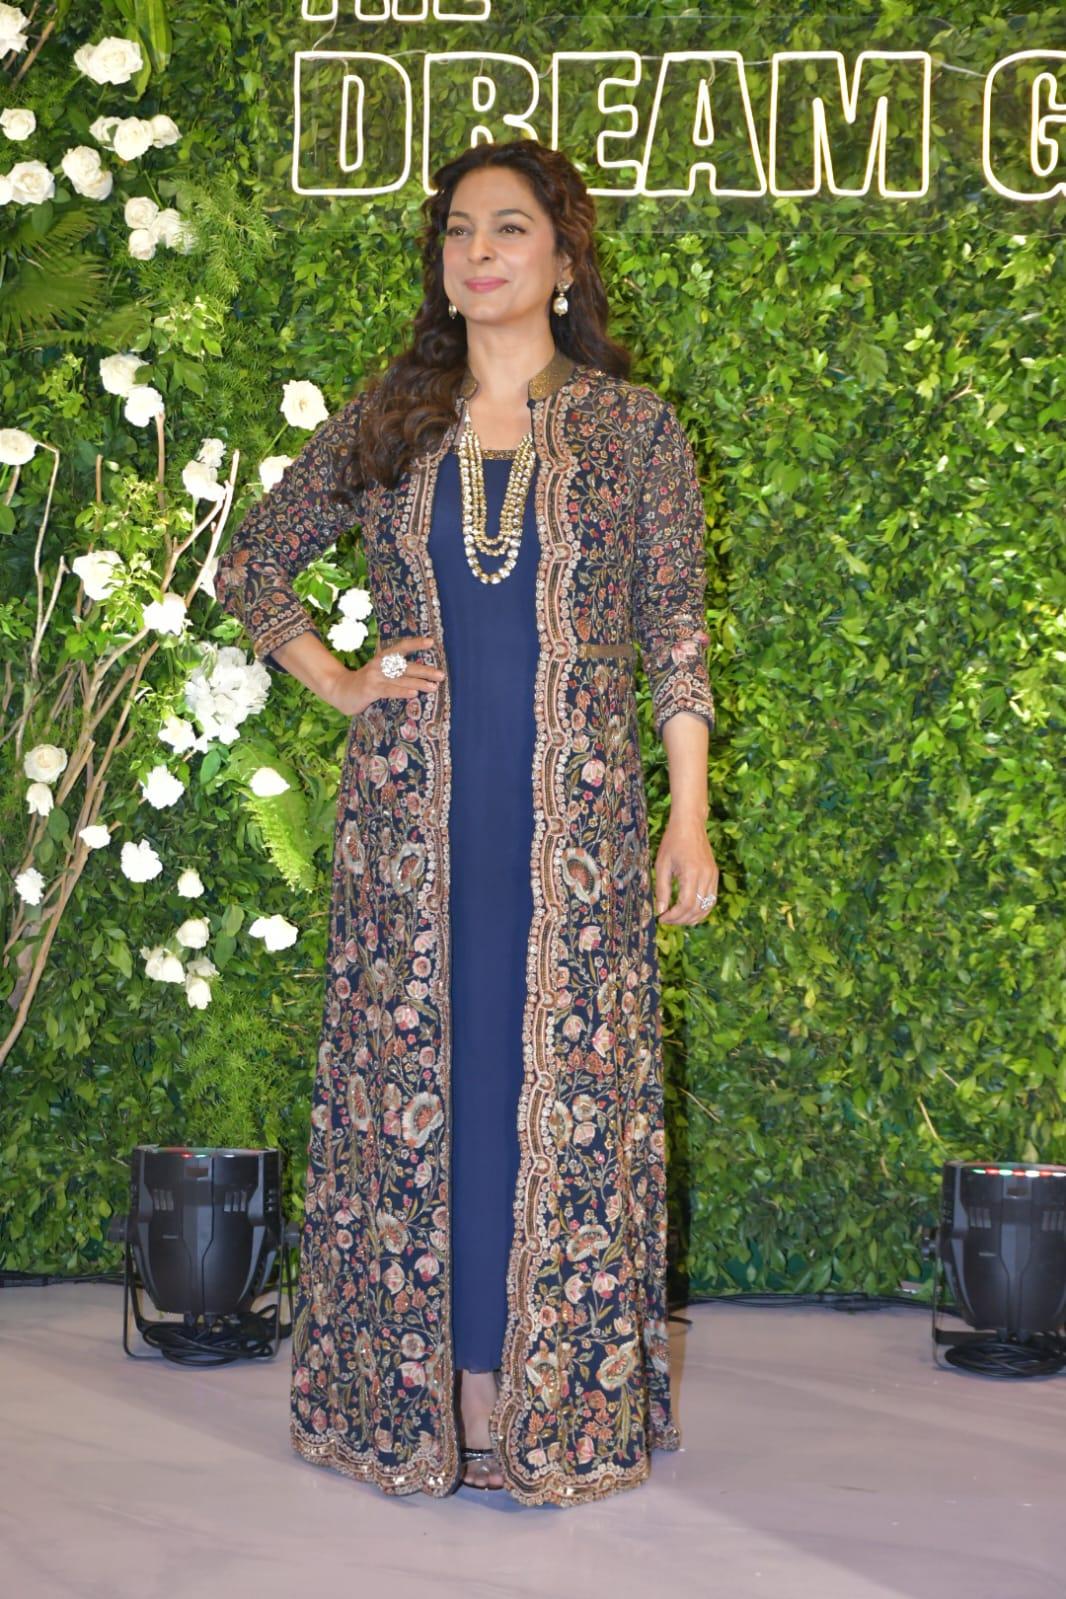 Always classy, Juhi Chawala looked stunning in her ensemble as she attended the birthday bash to cheer on Hema Malini